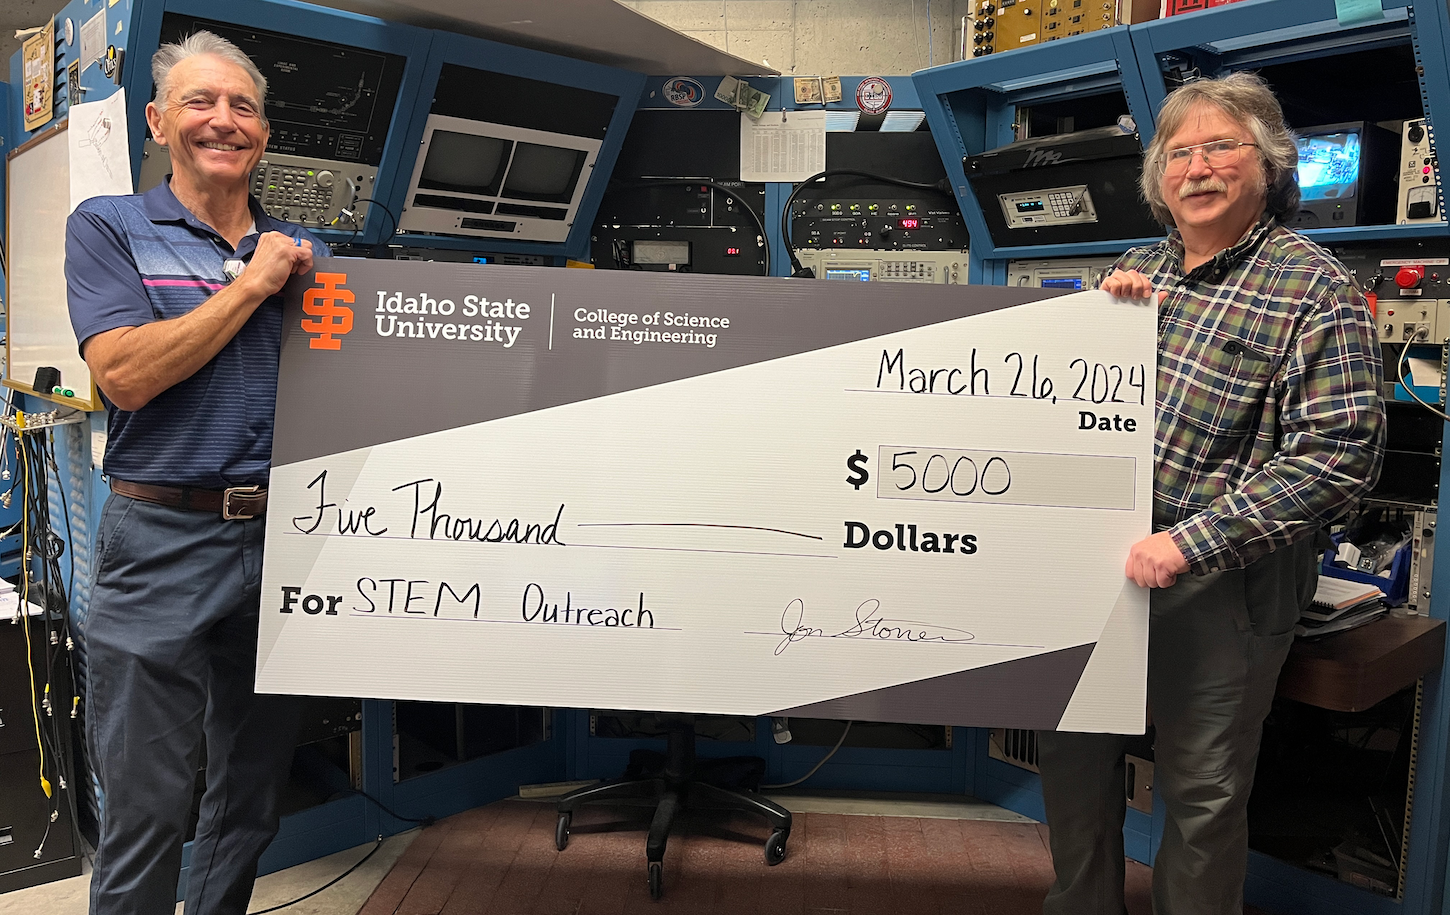 Two men hold a large check